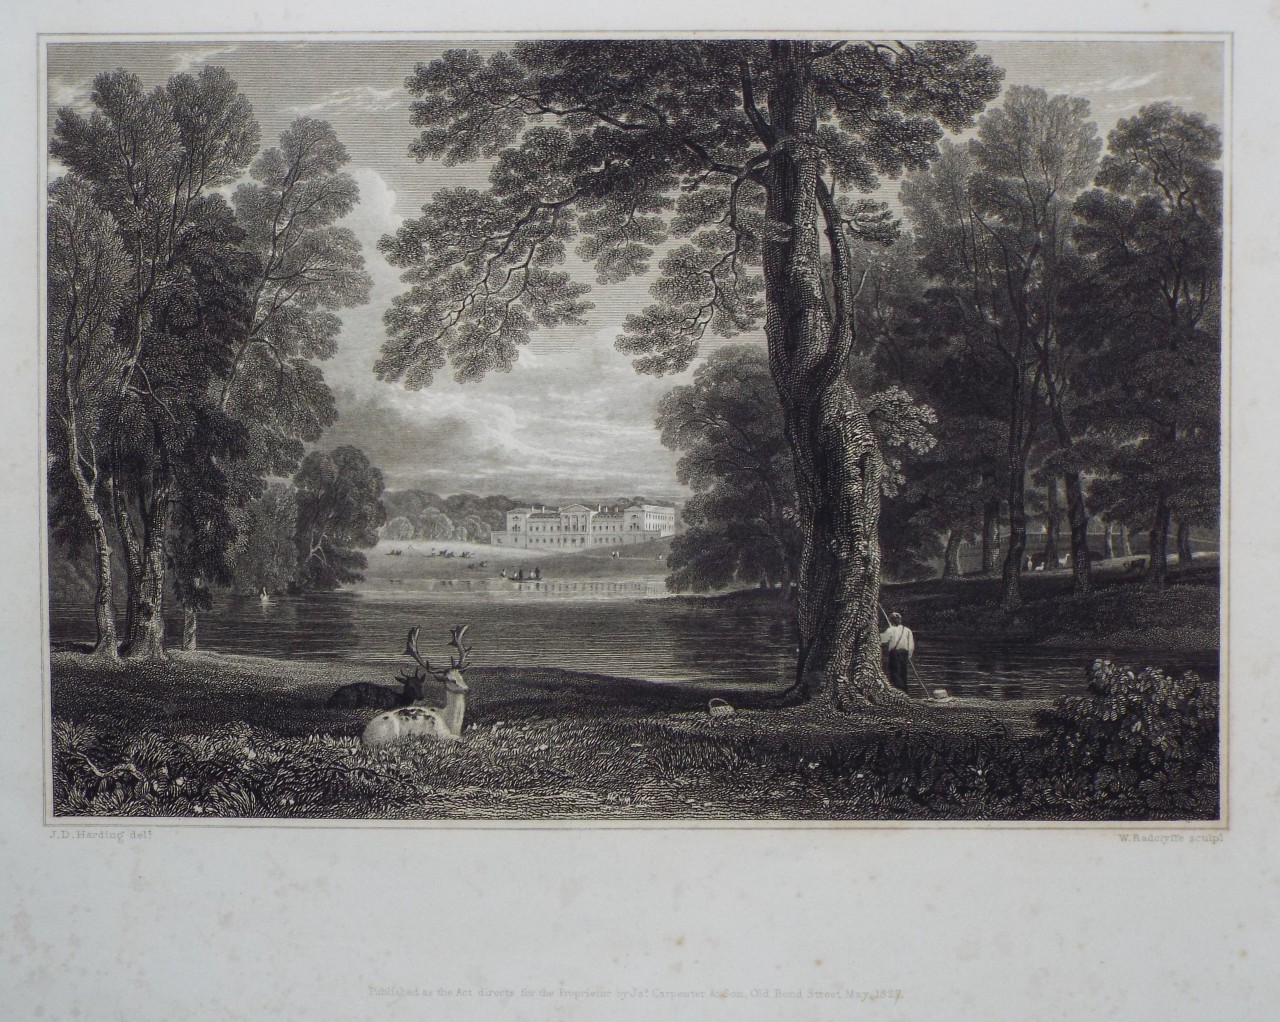 Print - A view of the house from the park - Radclyffe